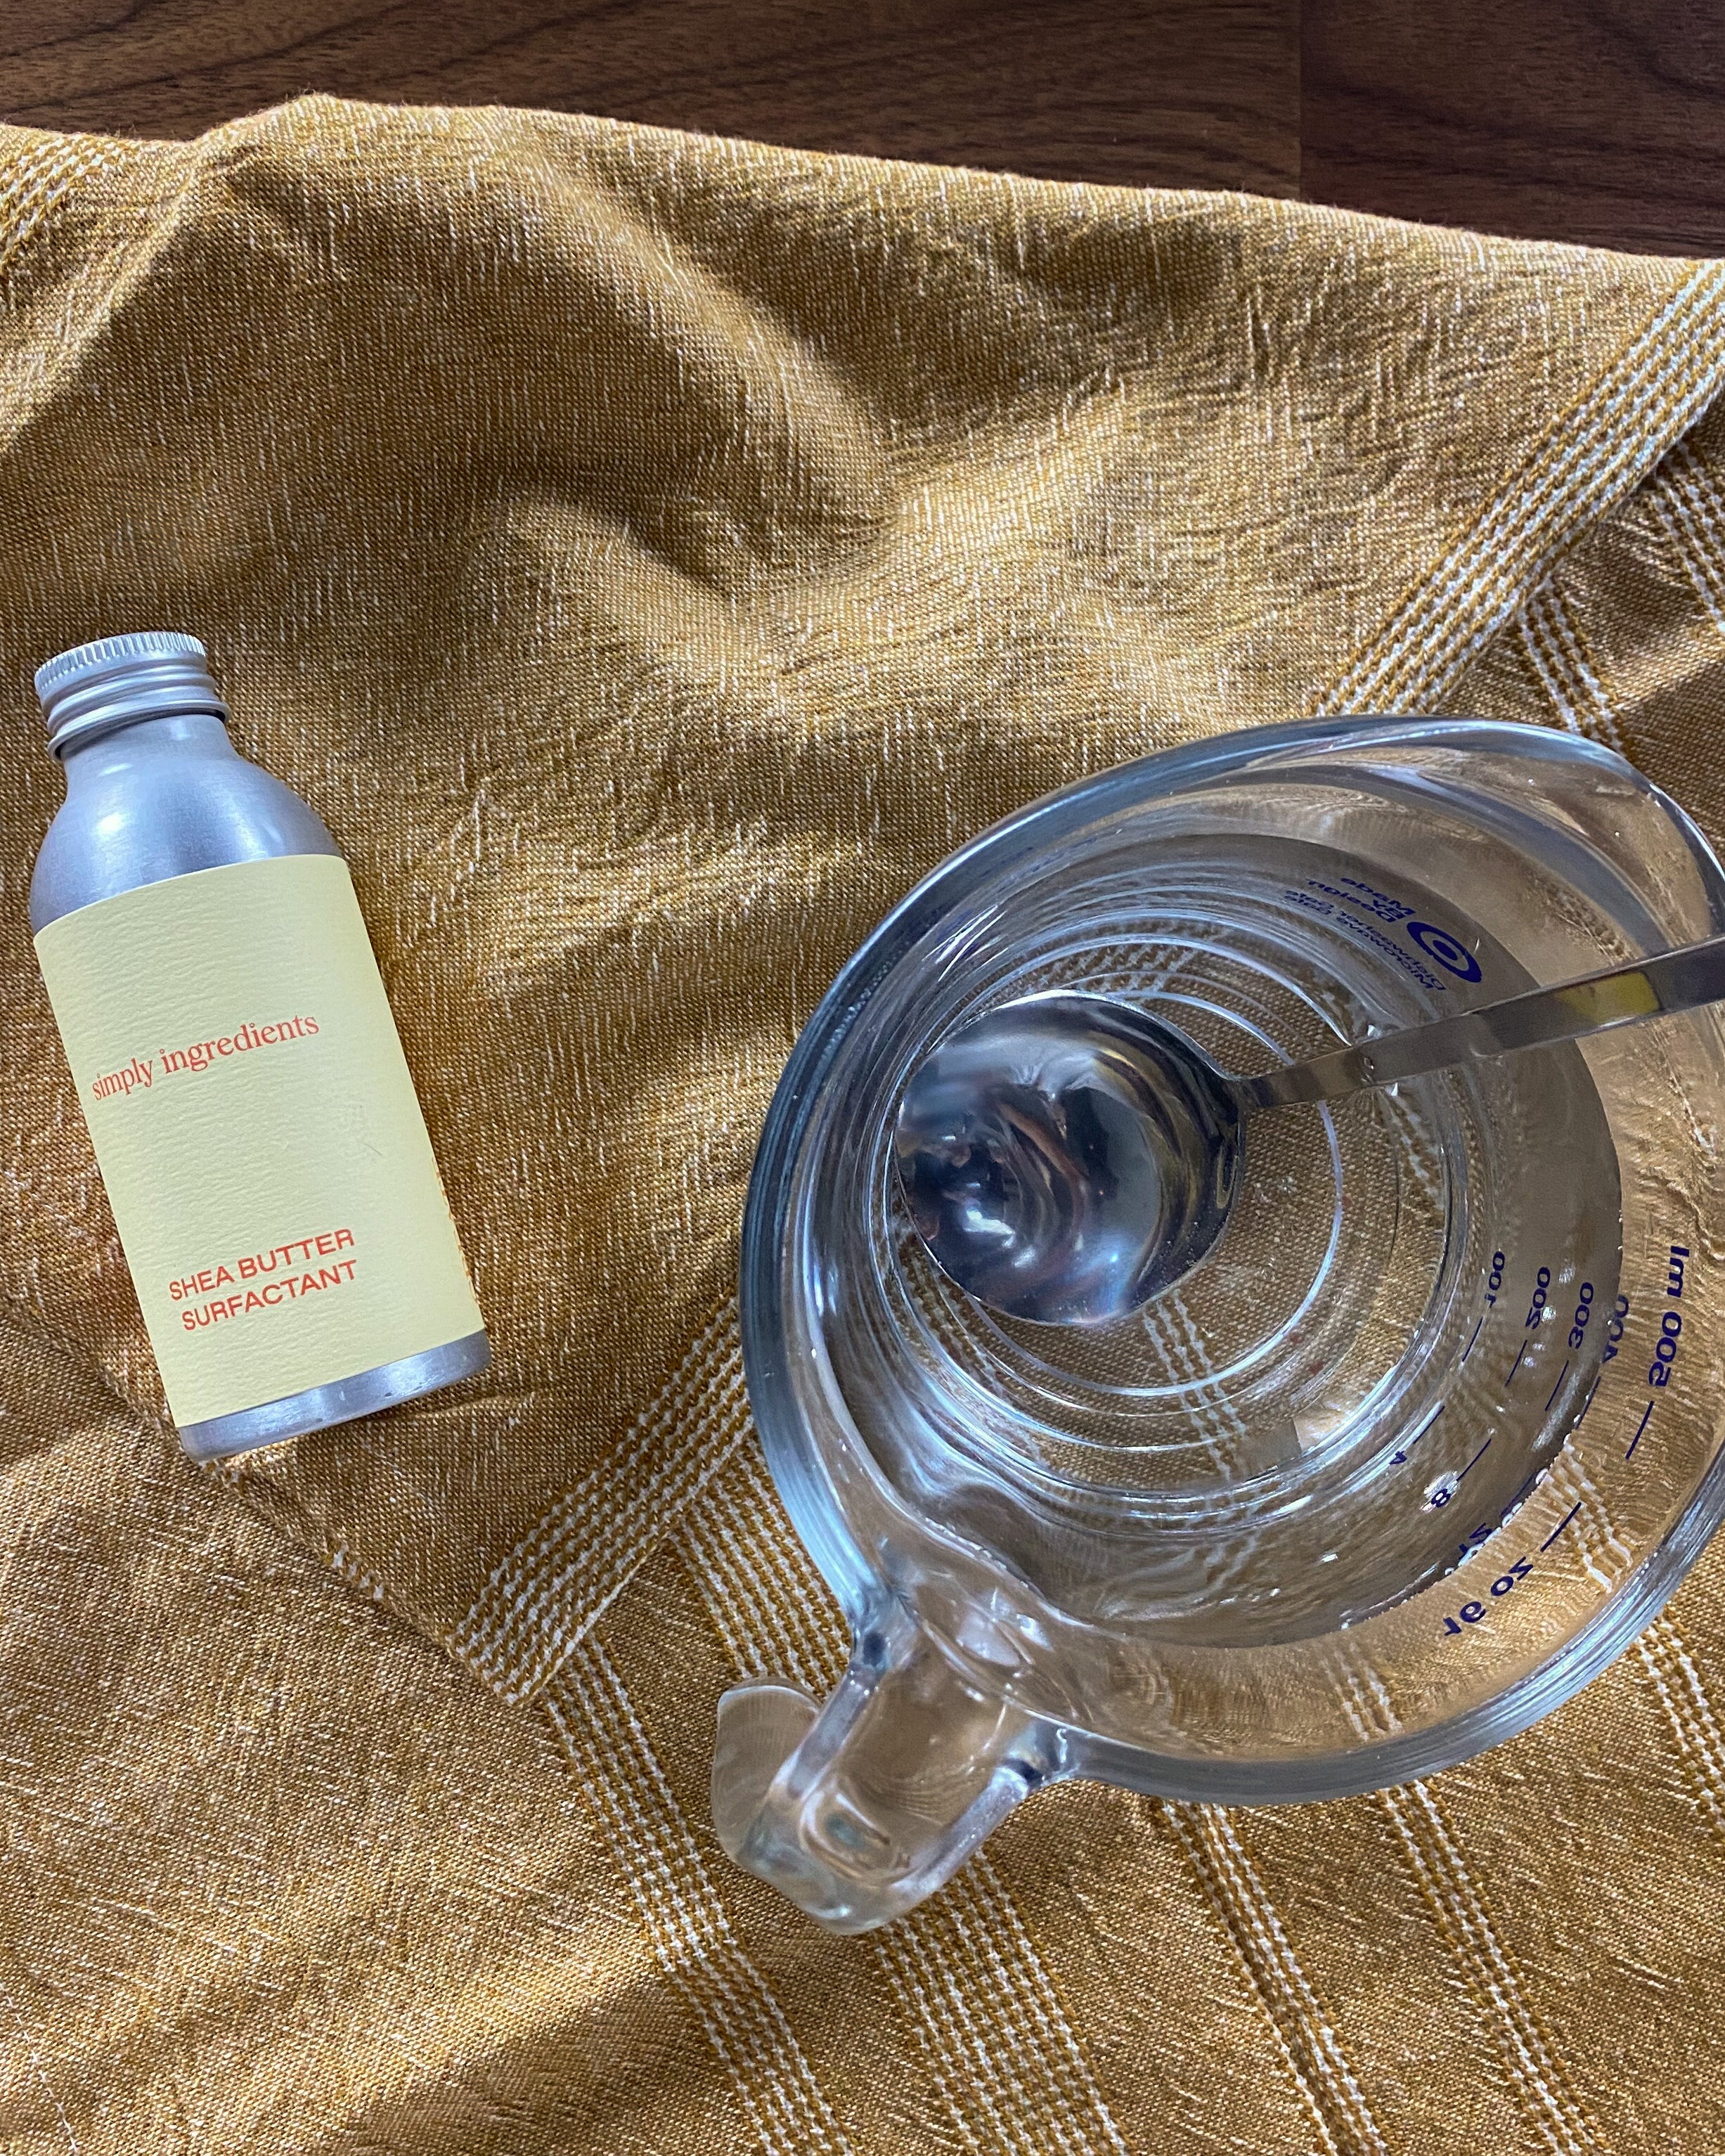 Shea Butter Surfactant next to bowl of the micellar water recipe with spoon